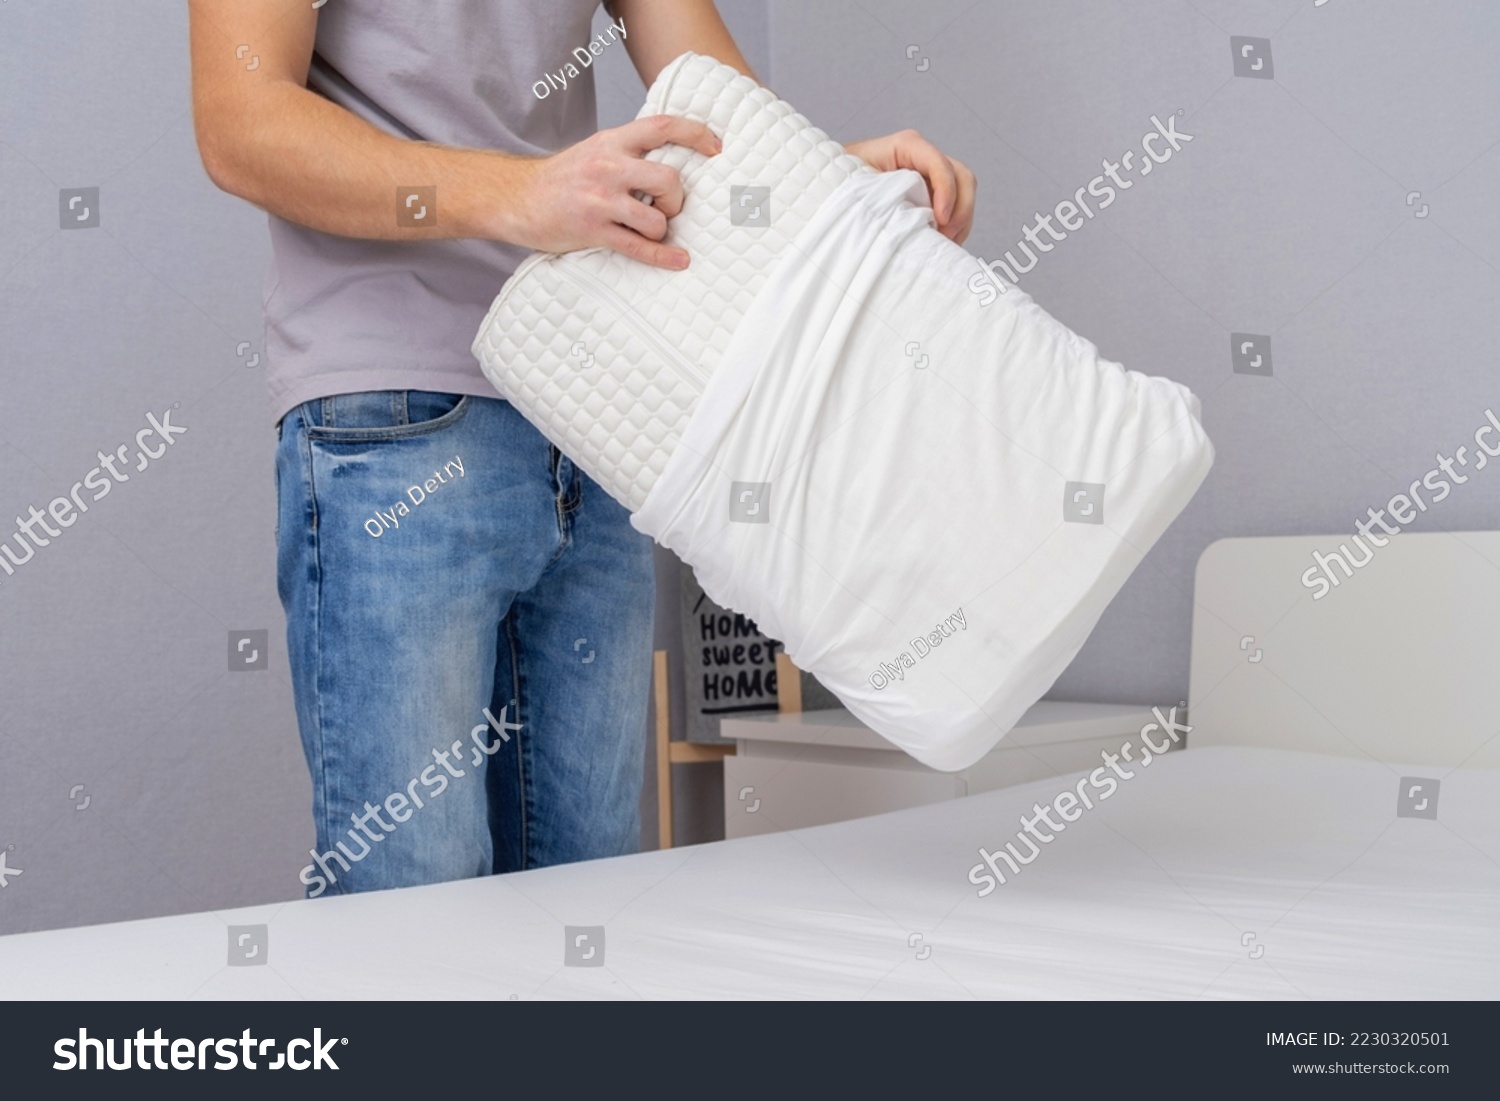 A man tucks an orthopedic pillow with a fresh bright white pillowcase. Making bed with fresh bed linen by white man. The day of change of bed linen. The day of washing bed linen in the laundry room. #2230320501